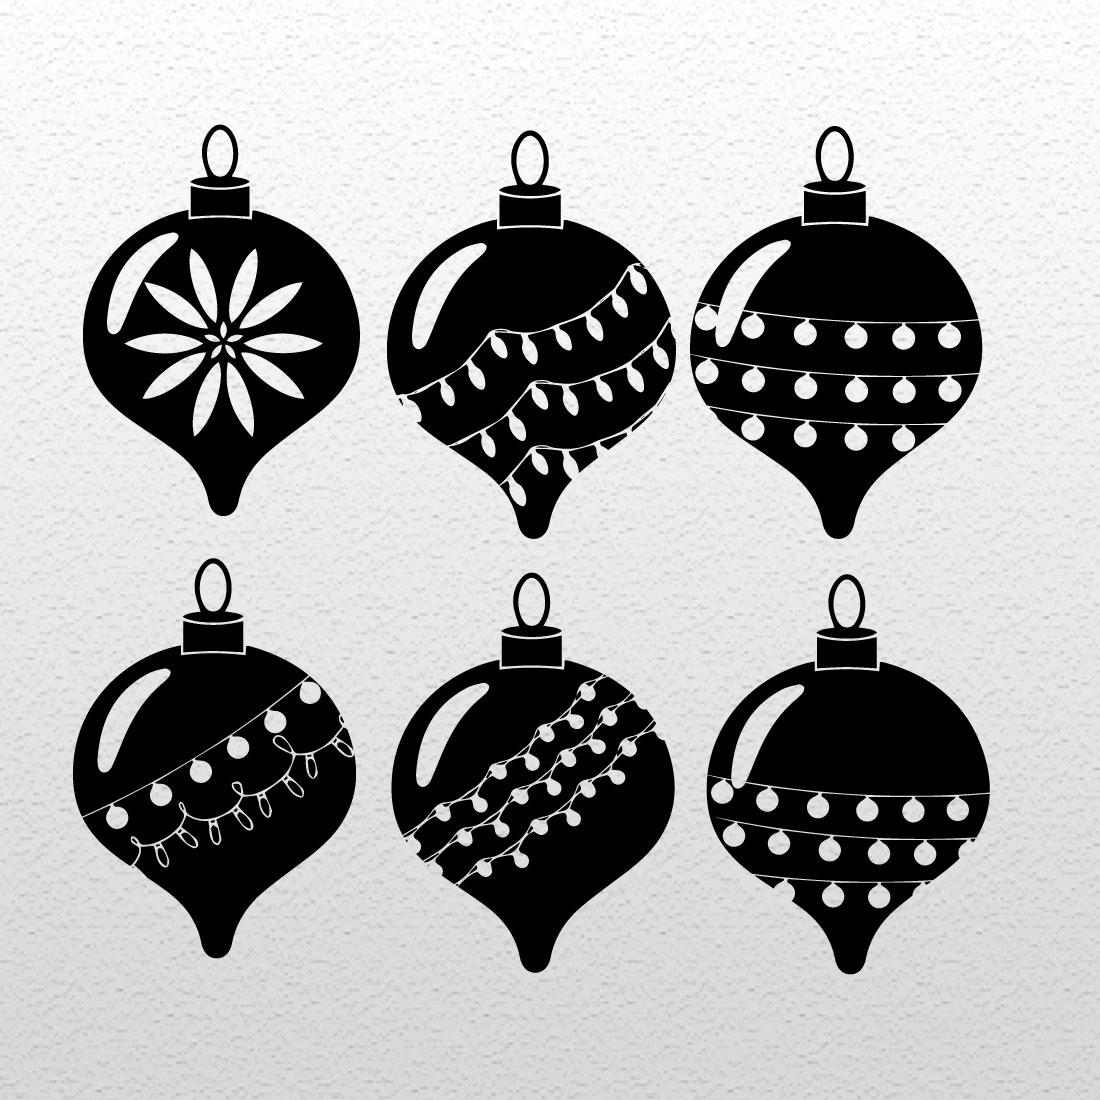 Collection of black marvelous images of Christmas tree ornaments